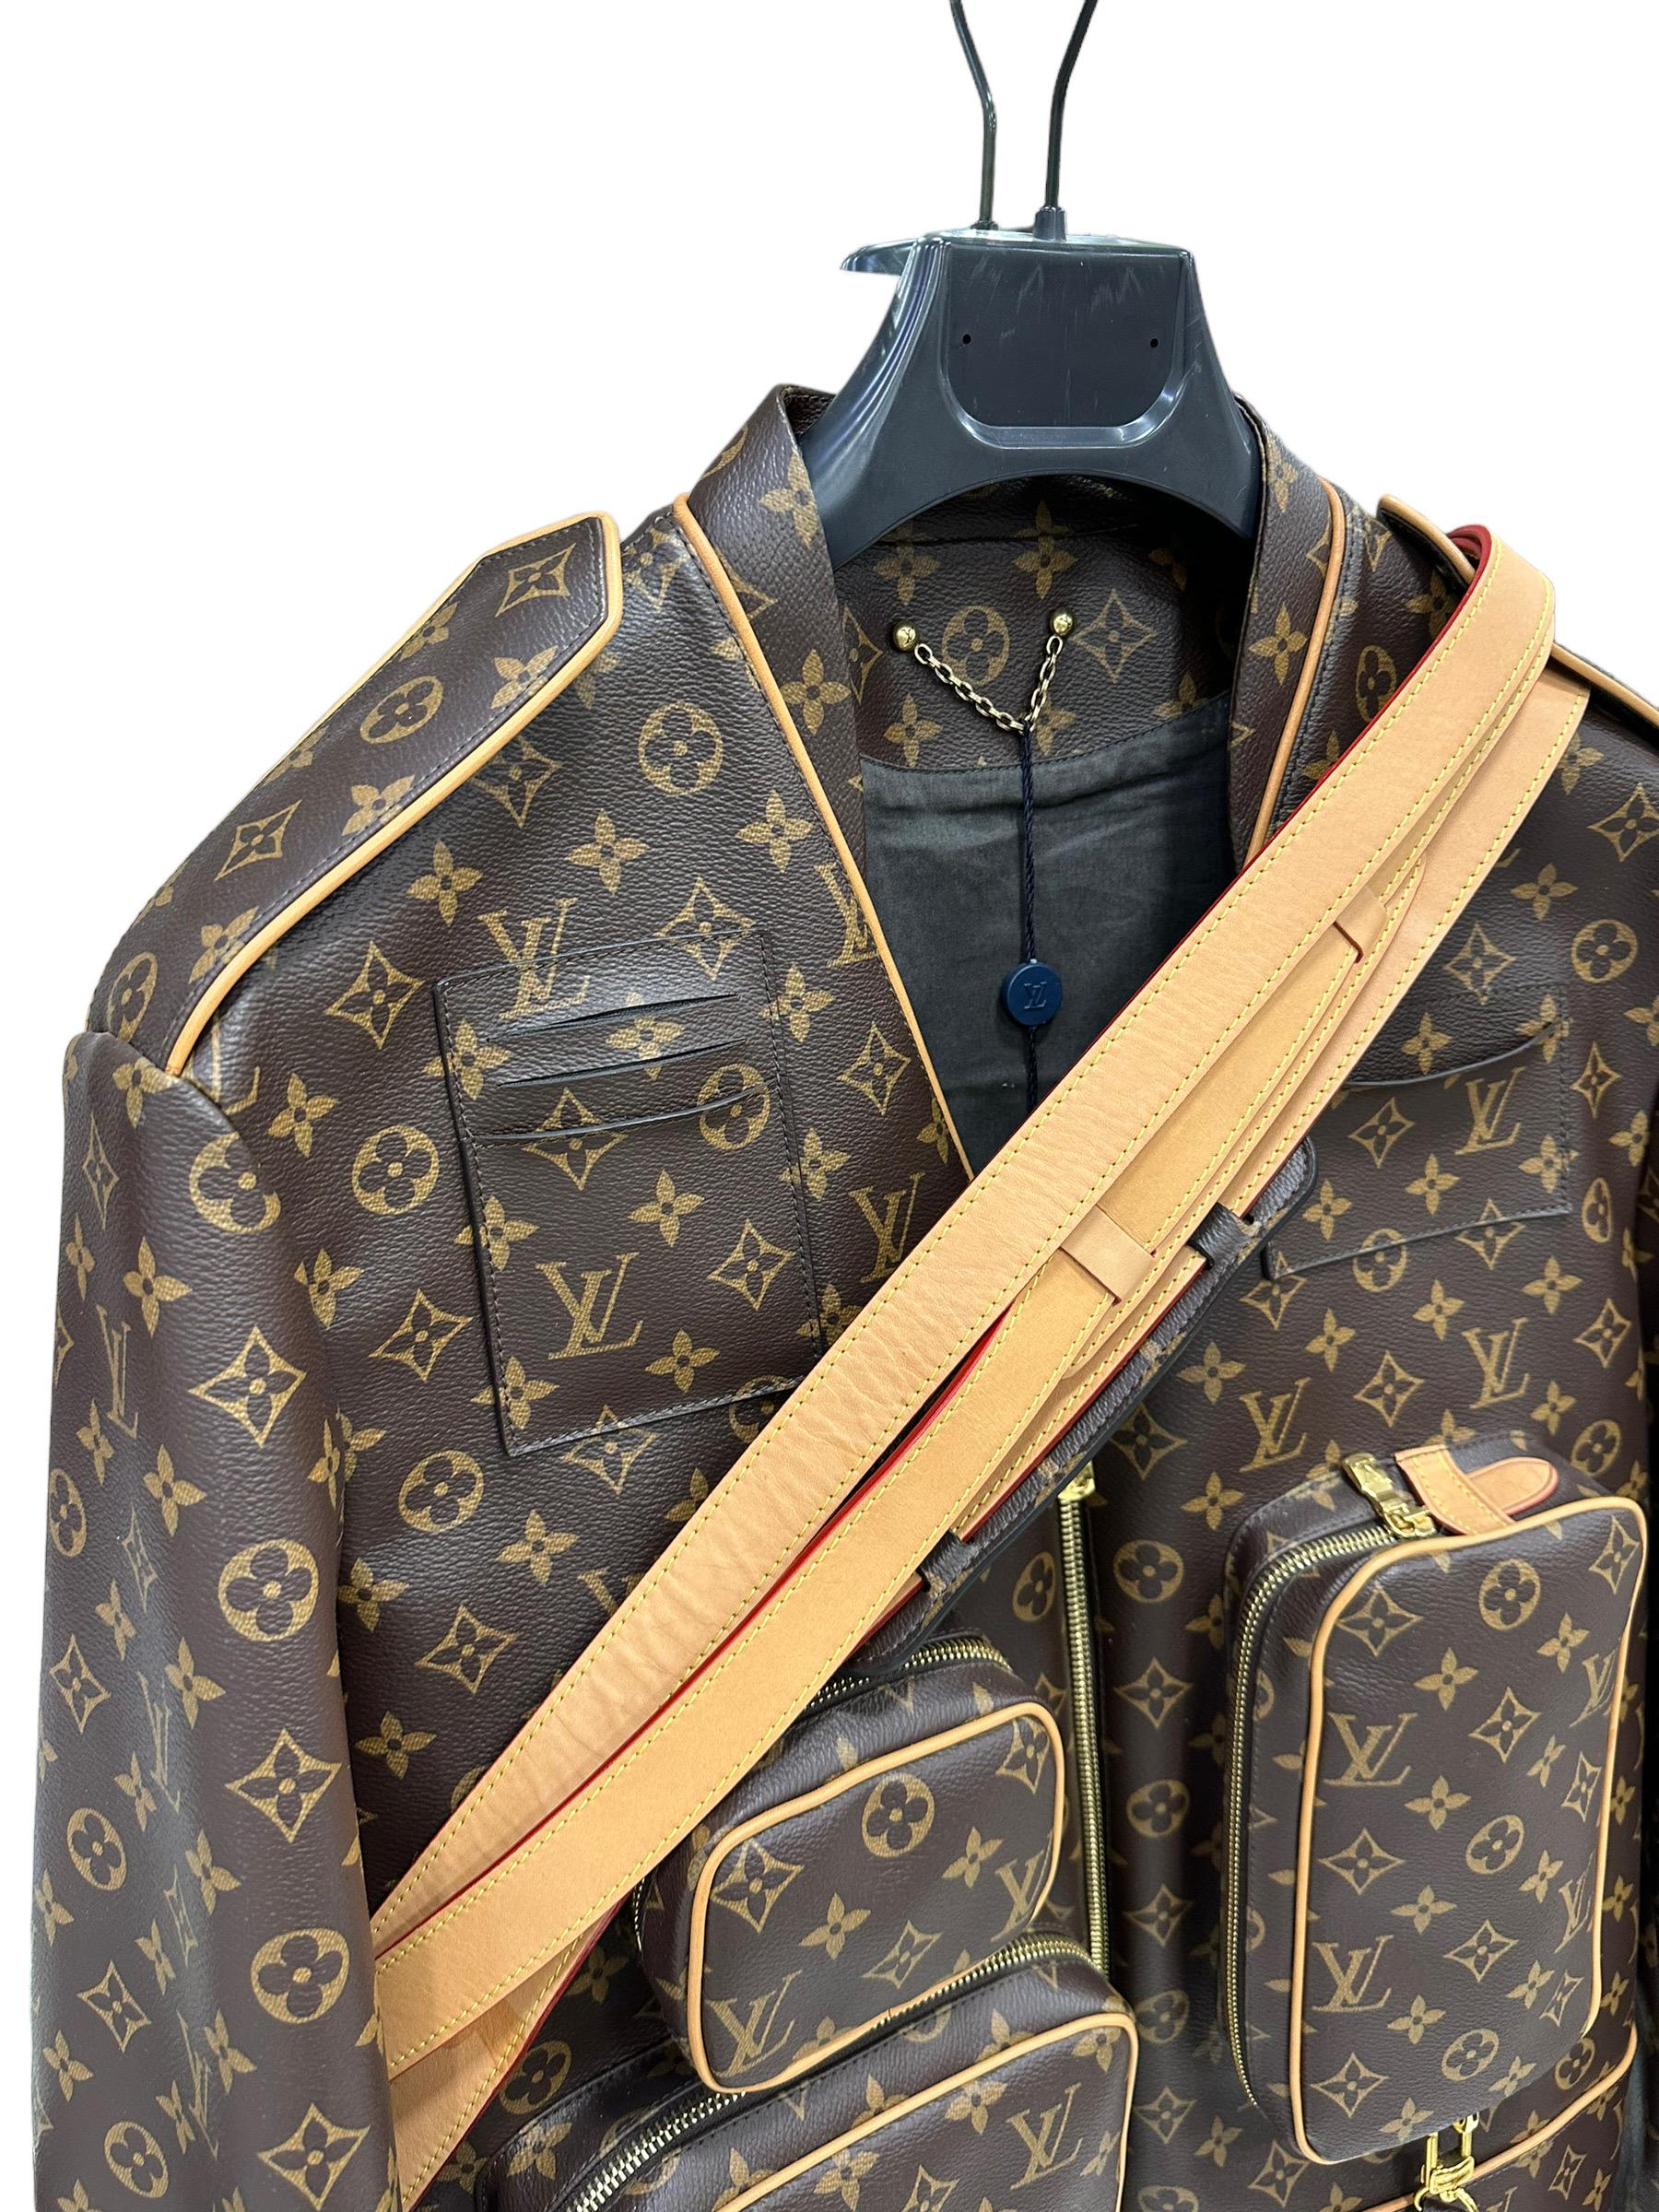 The Monogram admiral jacket pays homage to Louis Vuitton's craftsmanship. The military-style model, made of Monogram canvas, combines the bandolier with details inspired by the Maison's leather goods, such as natural cowhide finishes, removable